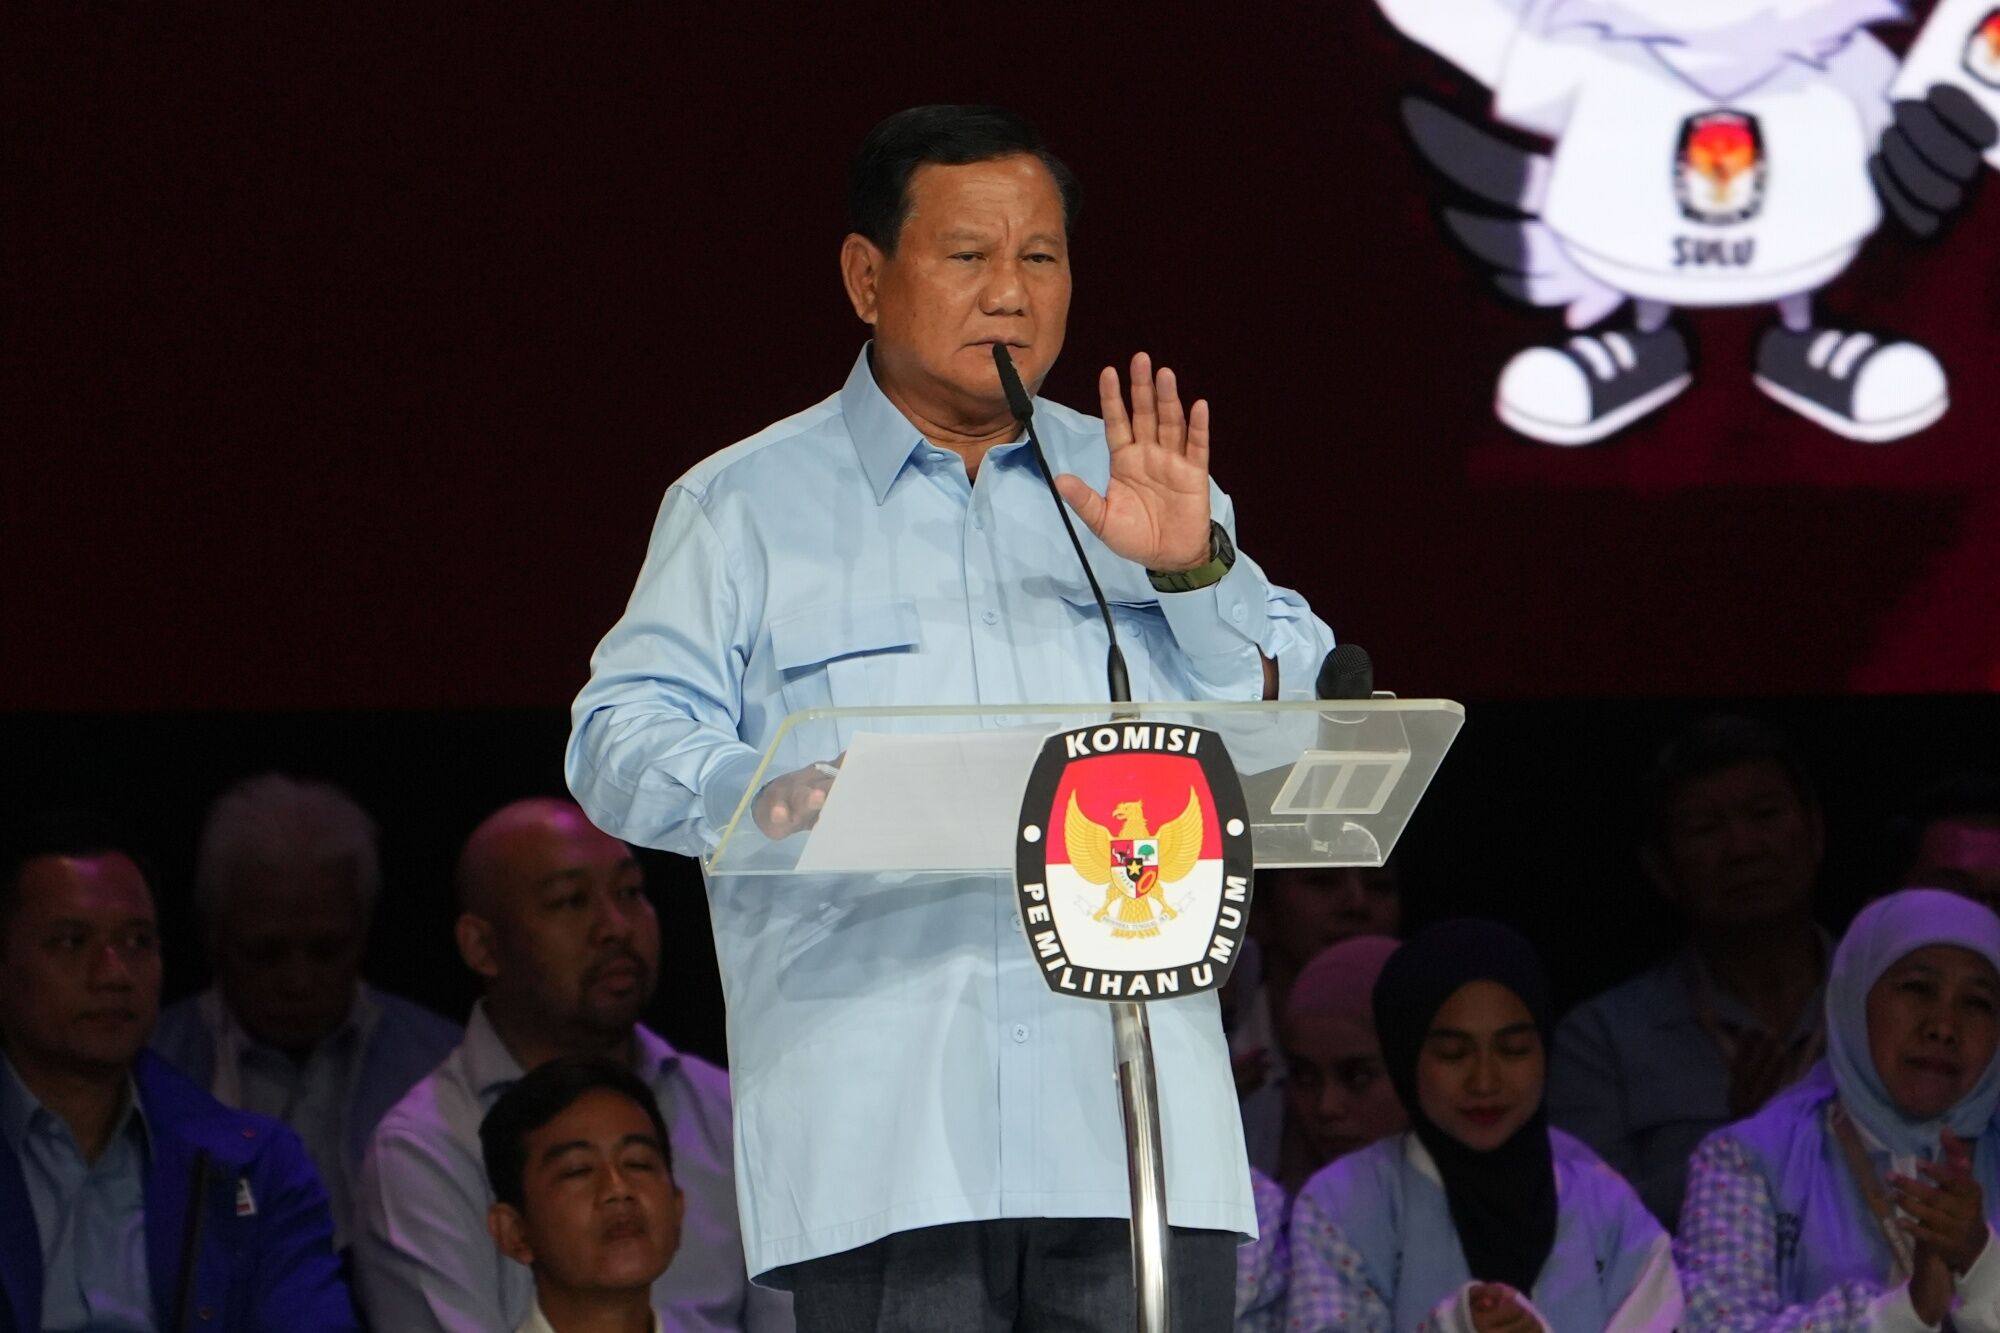 Prabowo Subianto speaks during the final presidential debate in Jakarta on Sunday. Photo: Bloomberg